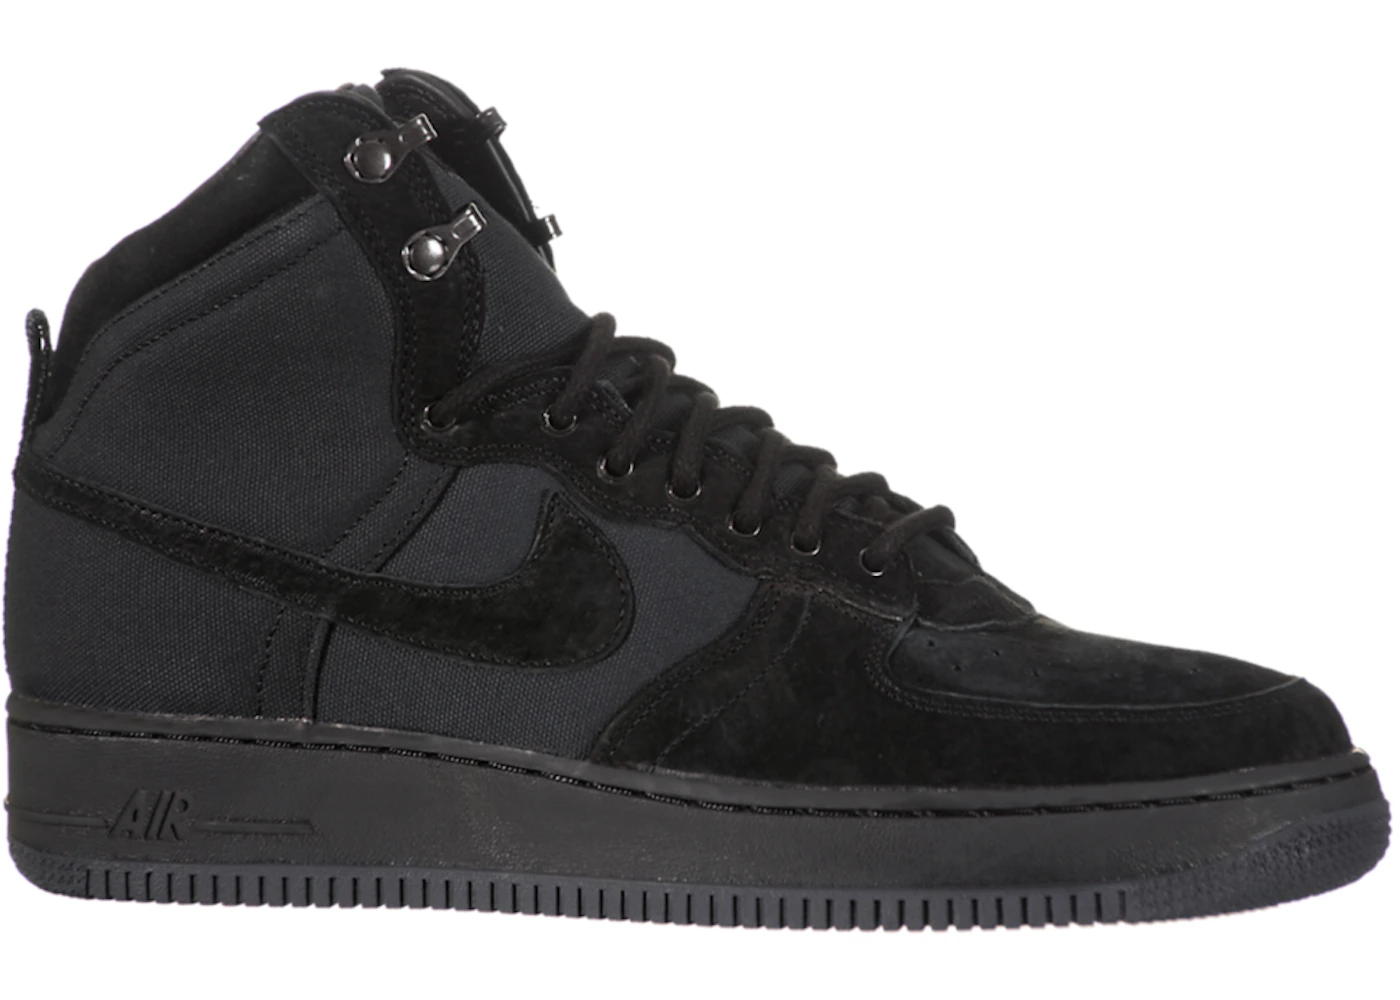 Nike Air Force 1 High Deconstructed Military Boot Black Men's - 525316 ...